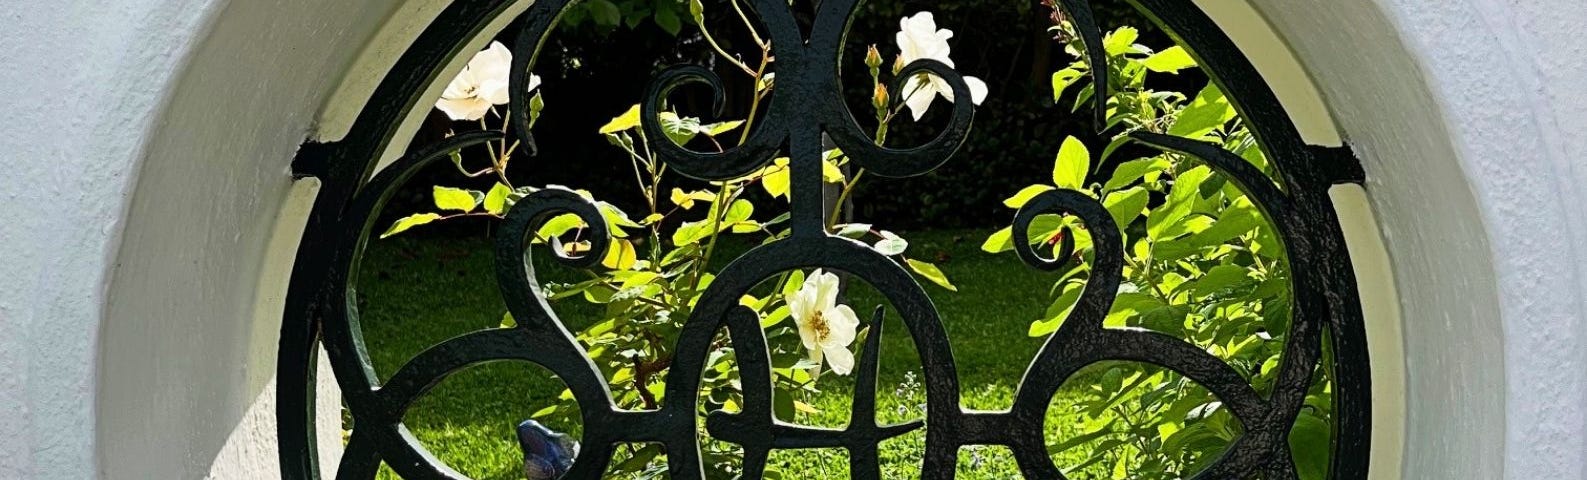 An ornate black wrought iron grille with the letter ‘H’ in the centre set into a round portal in a white fence. White rose bushes are in the garden behind the portal. The words, ‘Portal to Tranquility’, encircle the portal.